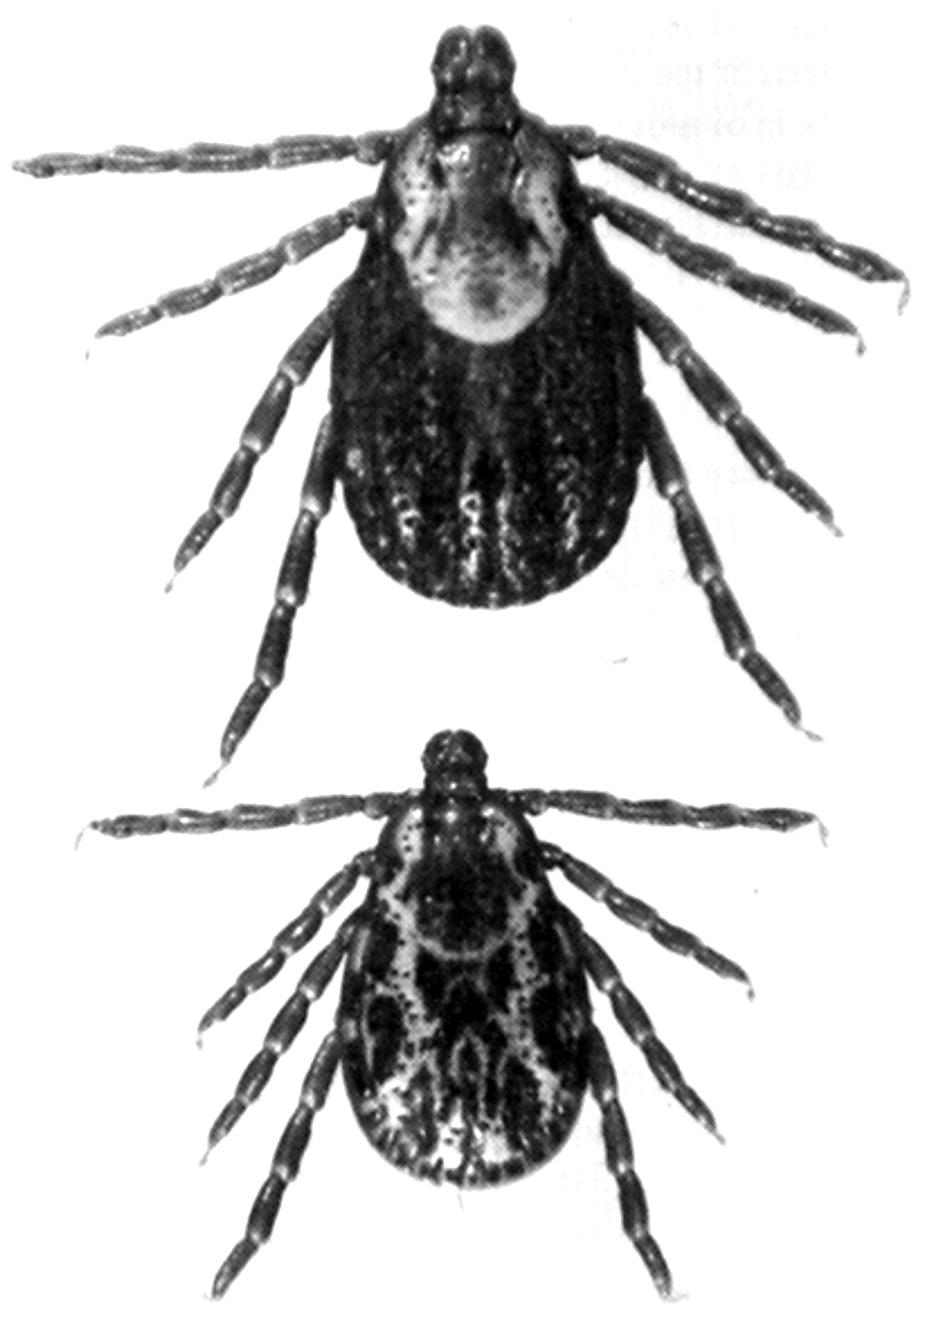 American Dog Tick [Dermacentor variabilis (Say)] The American dog tick is a common pest of dogs and other small, wild or domestic animals, which are the preferred hosts for the adults of this species.